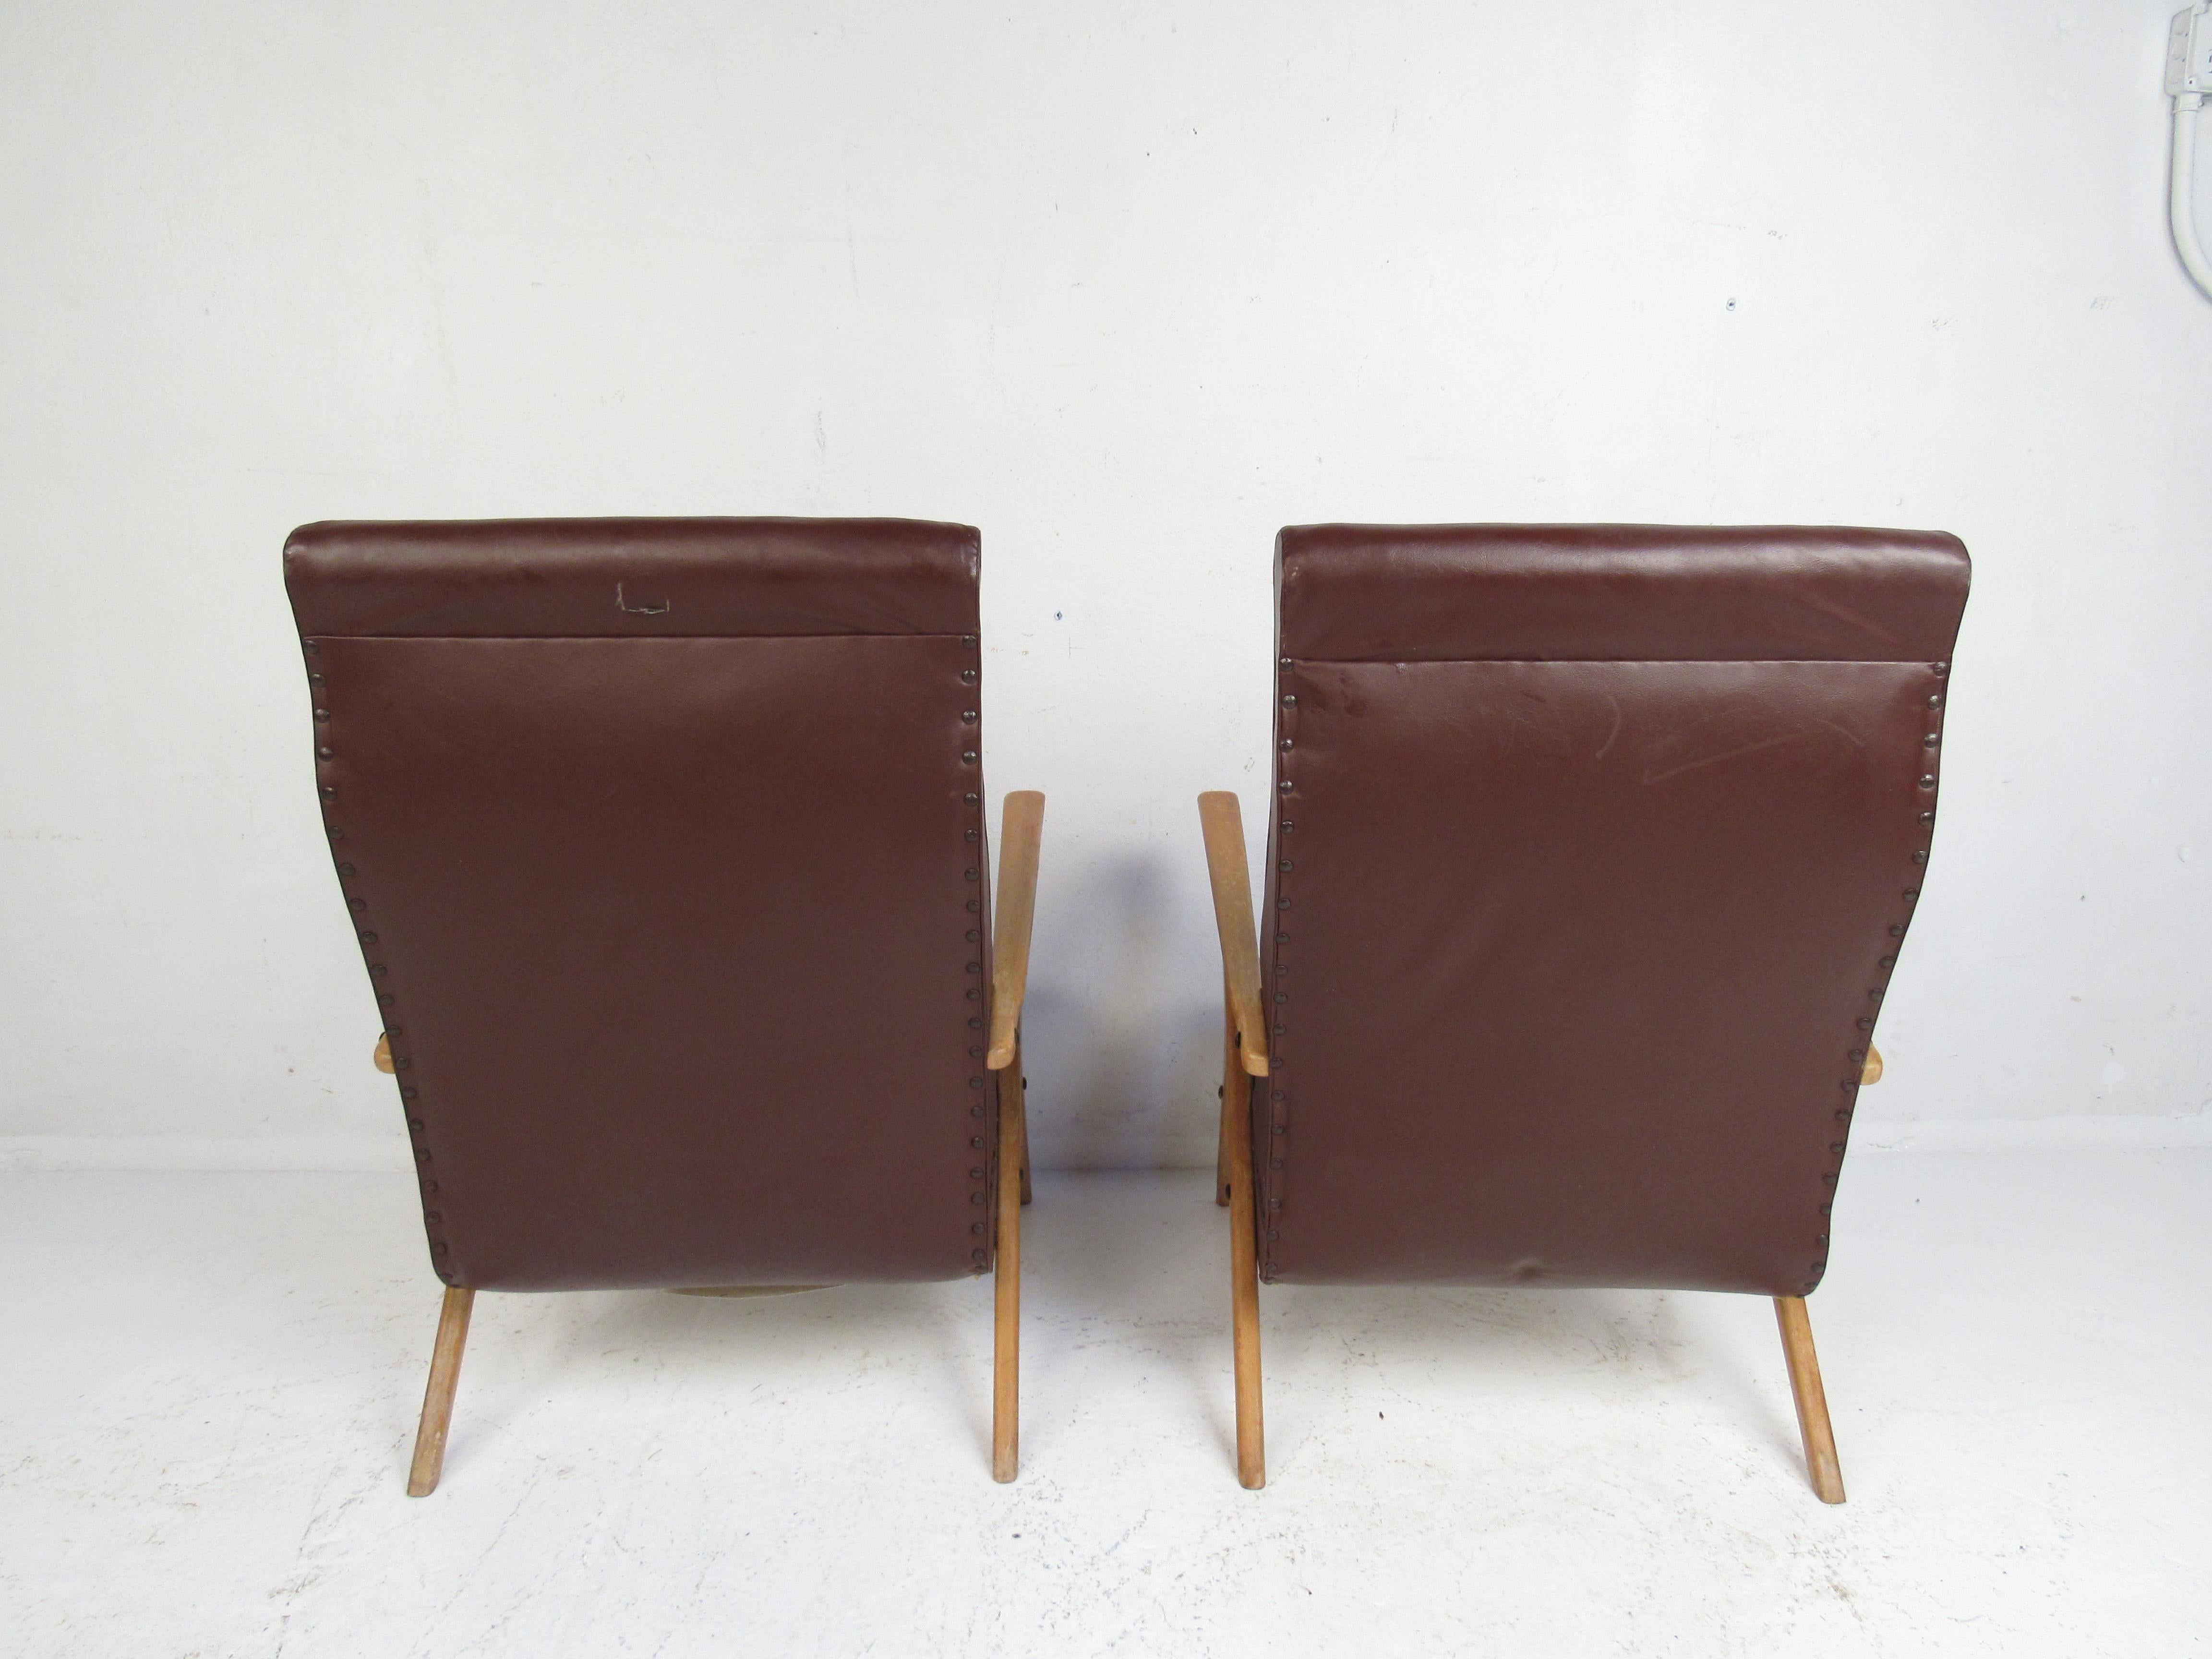 Pair of Midcentury Italian Lounge Chairs In Good Condition For Sale In Brooklyn, NY